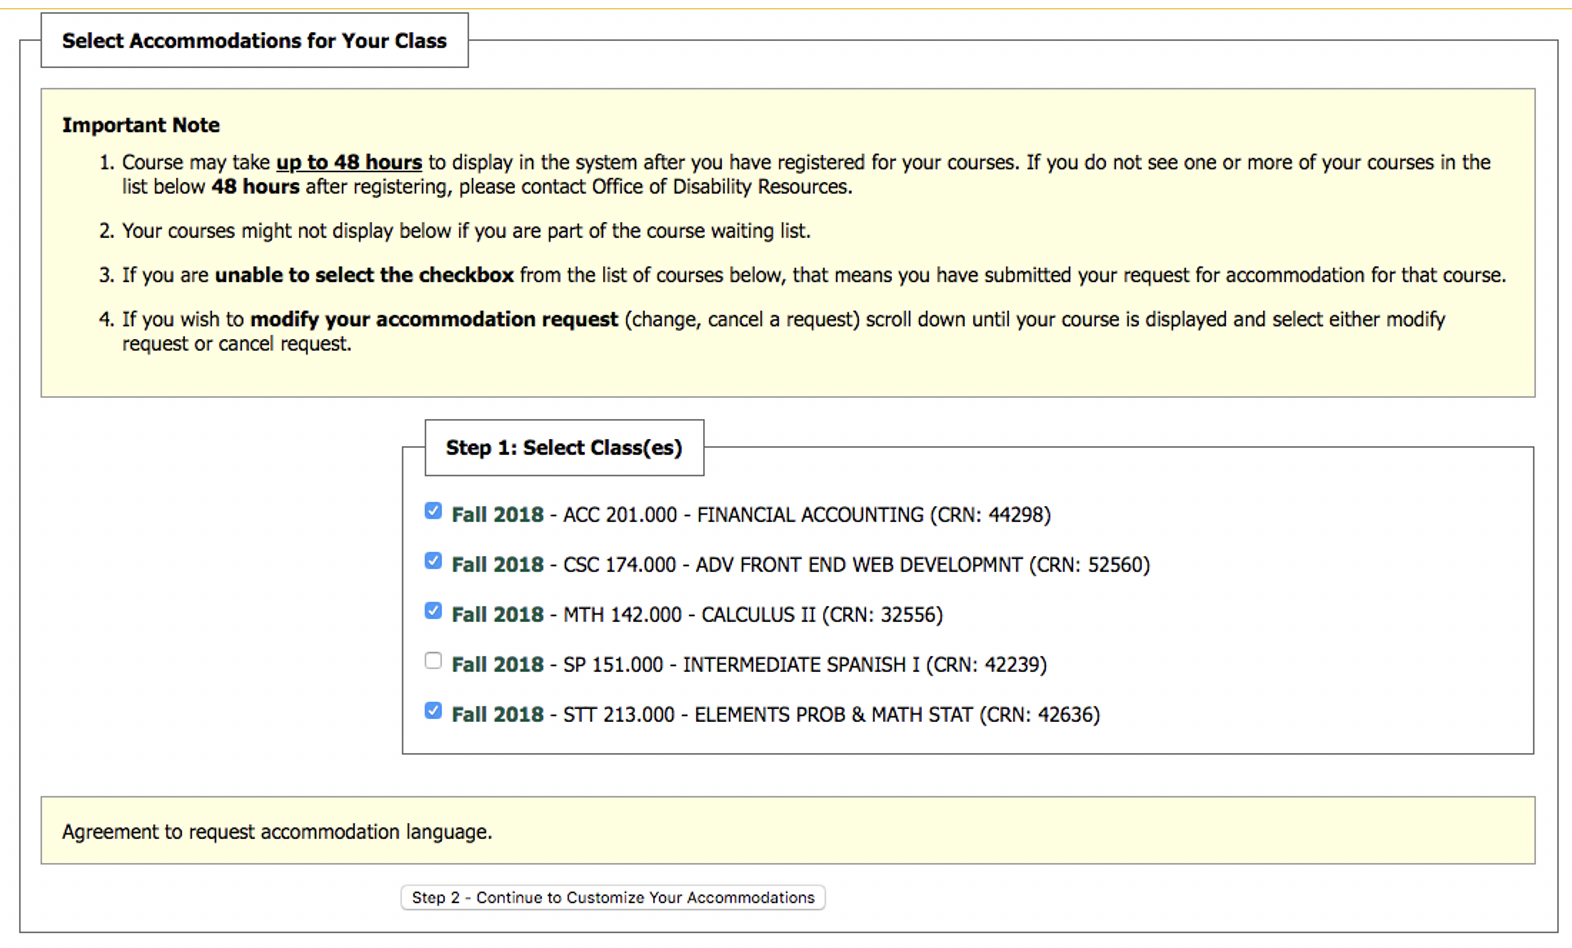 Screenshot of DR Student Portal Request Accommodations screen